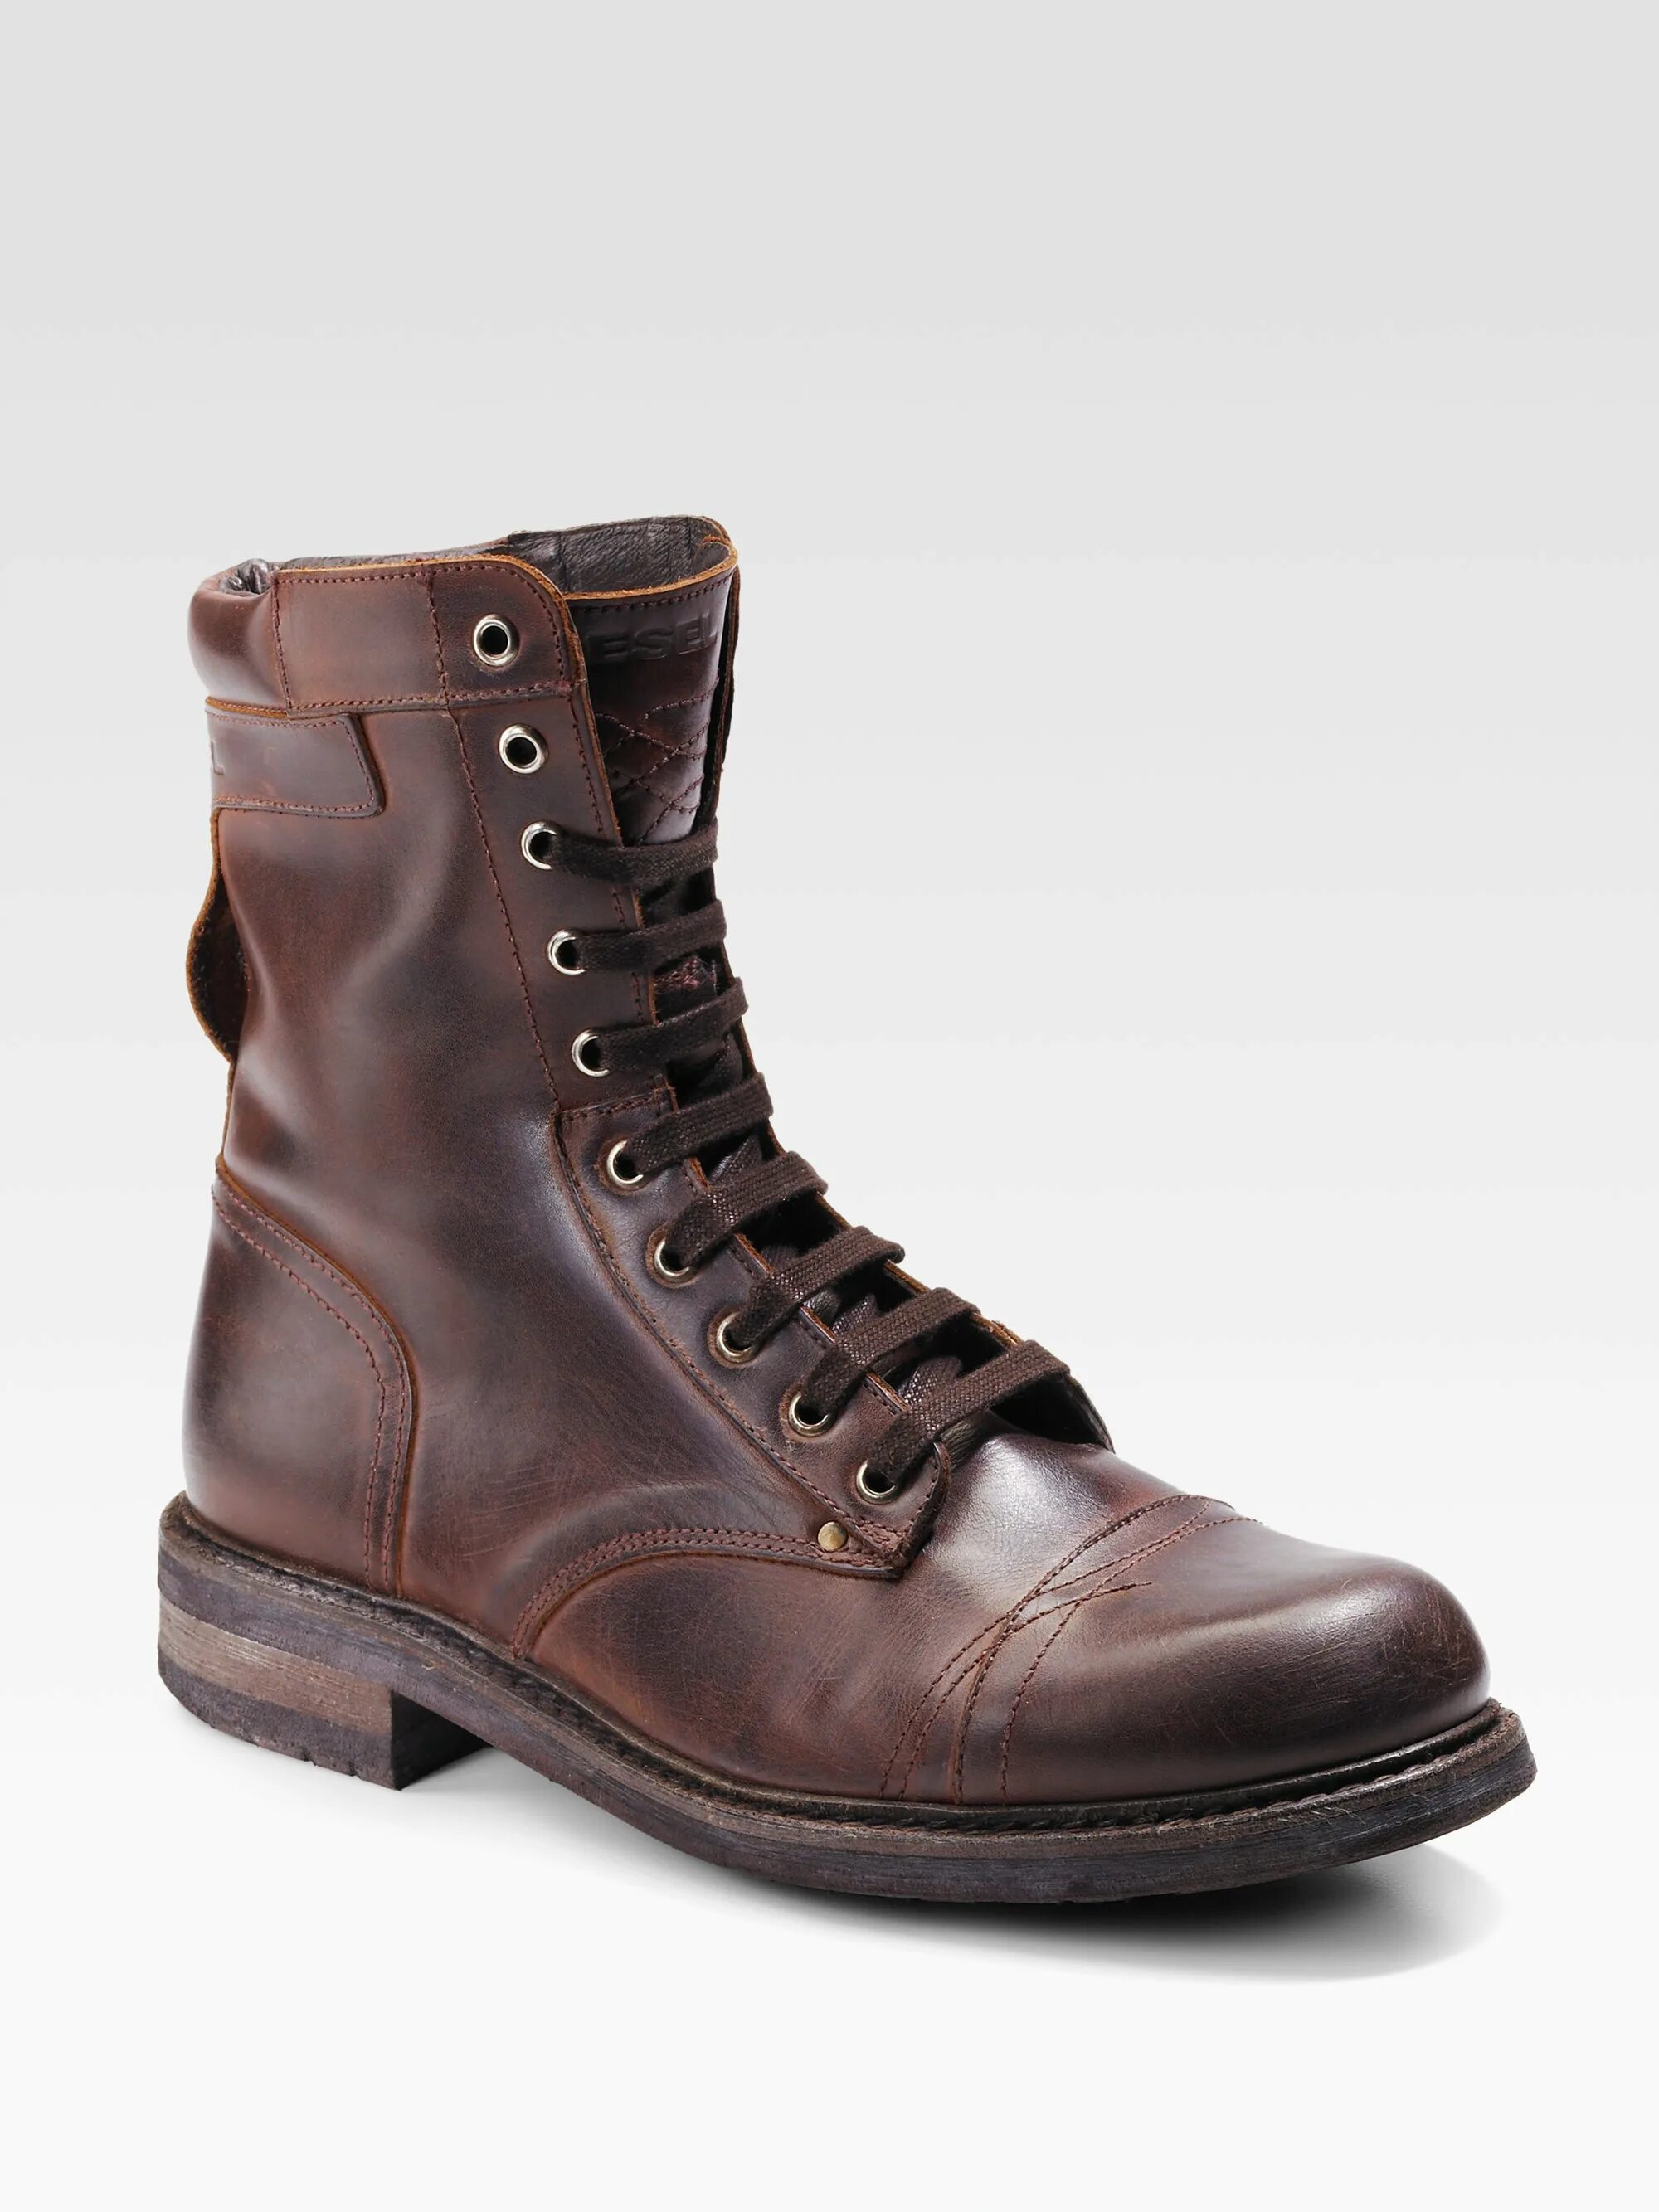 Diesel Military Boots. Diesel Butch Cassidy. Ботинки Diesel rtlabx104301. Diesel ботинки rtlabx103601.